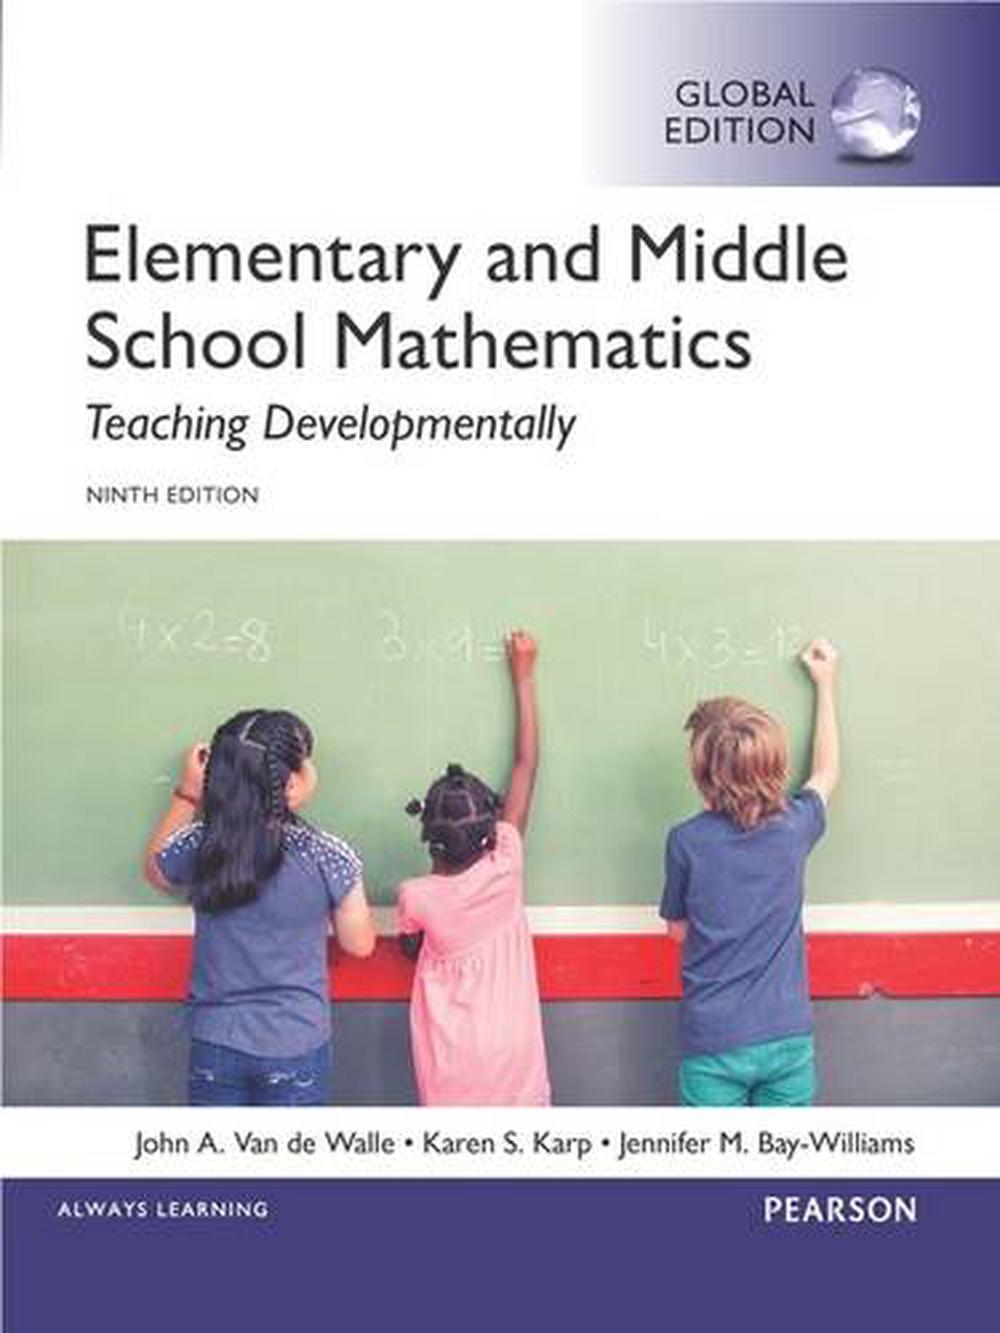 problems to solve in middle school mathematics book 1